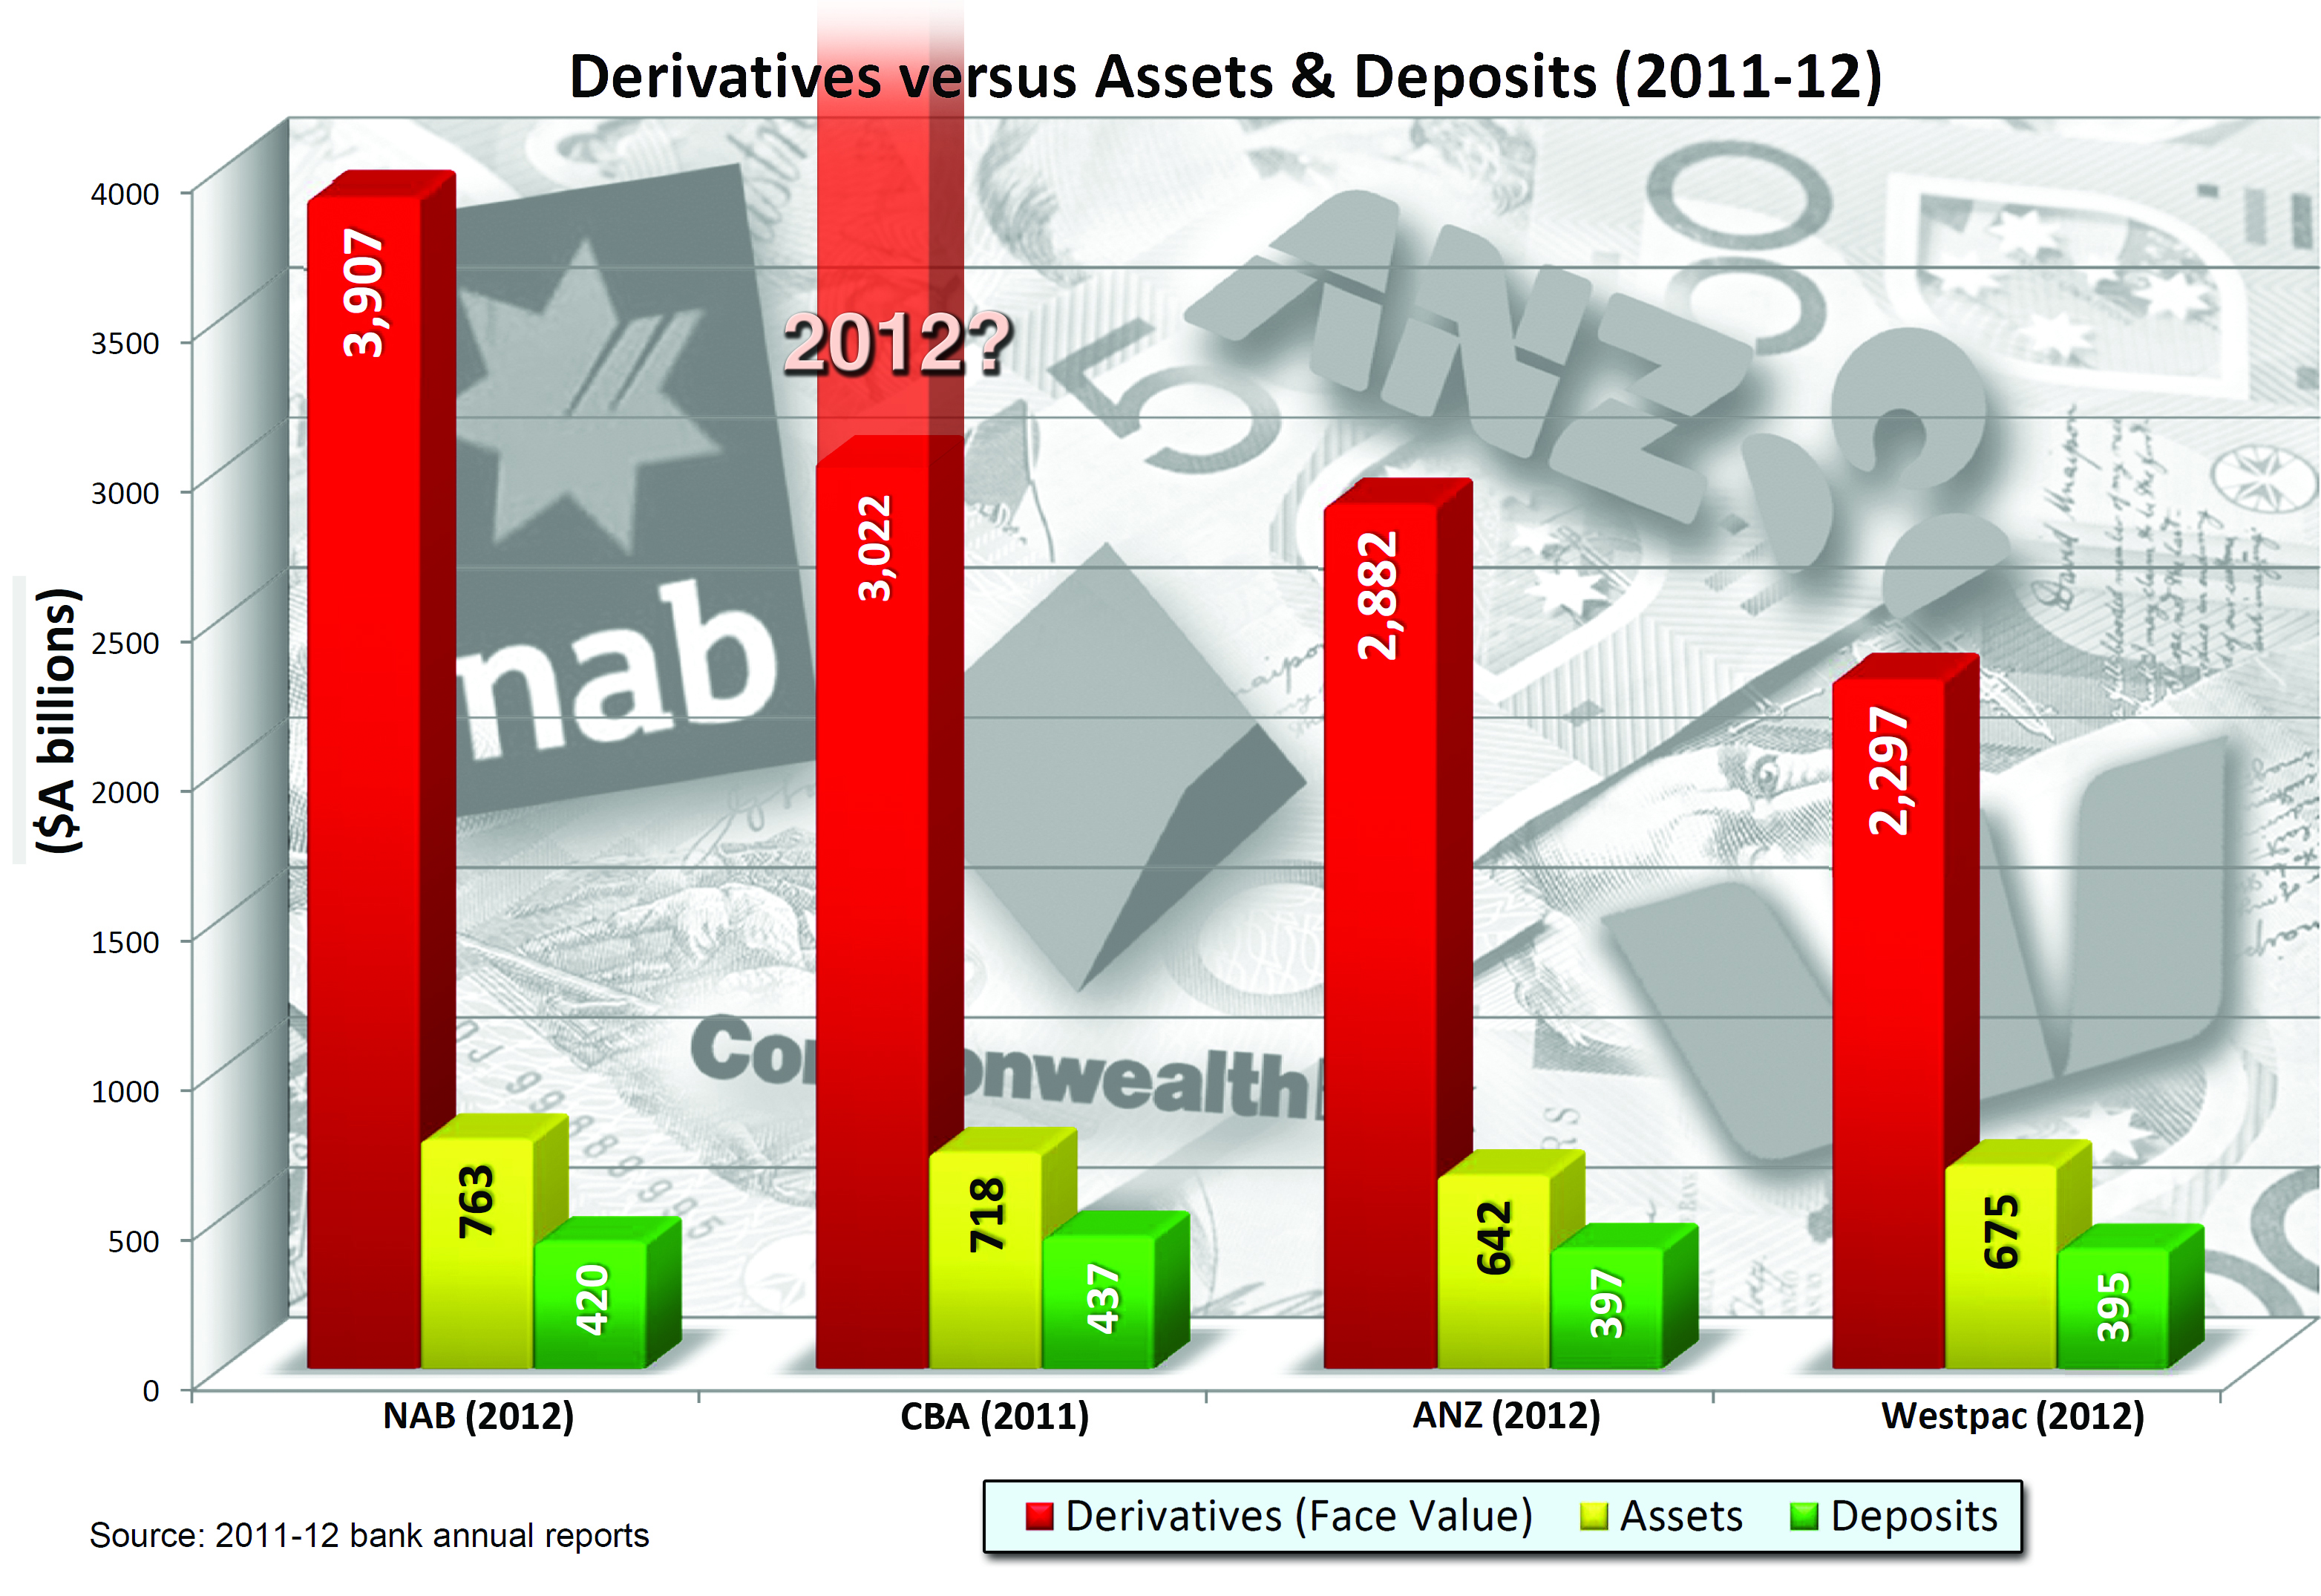 Australian banks' derivatives, except for CBA-what are they hiding? Click for enlargement.